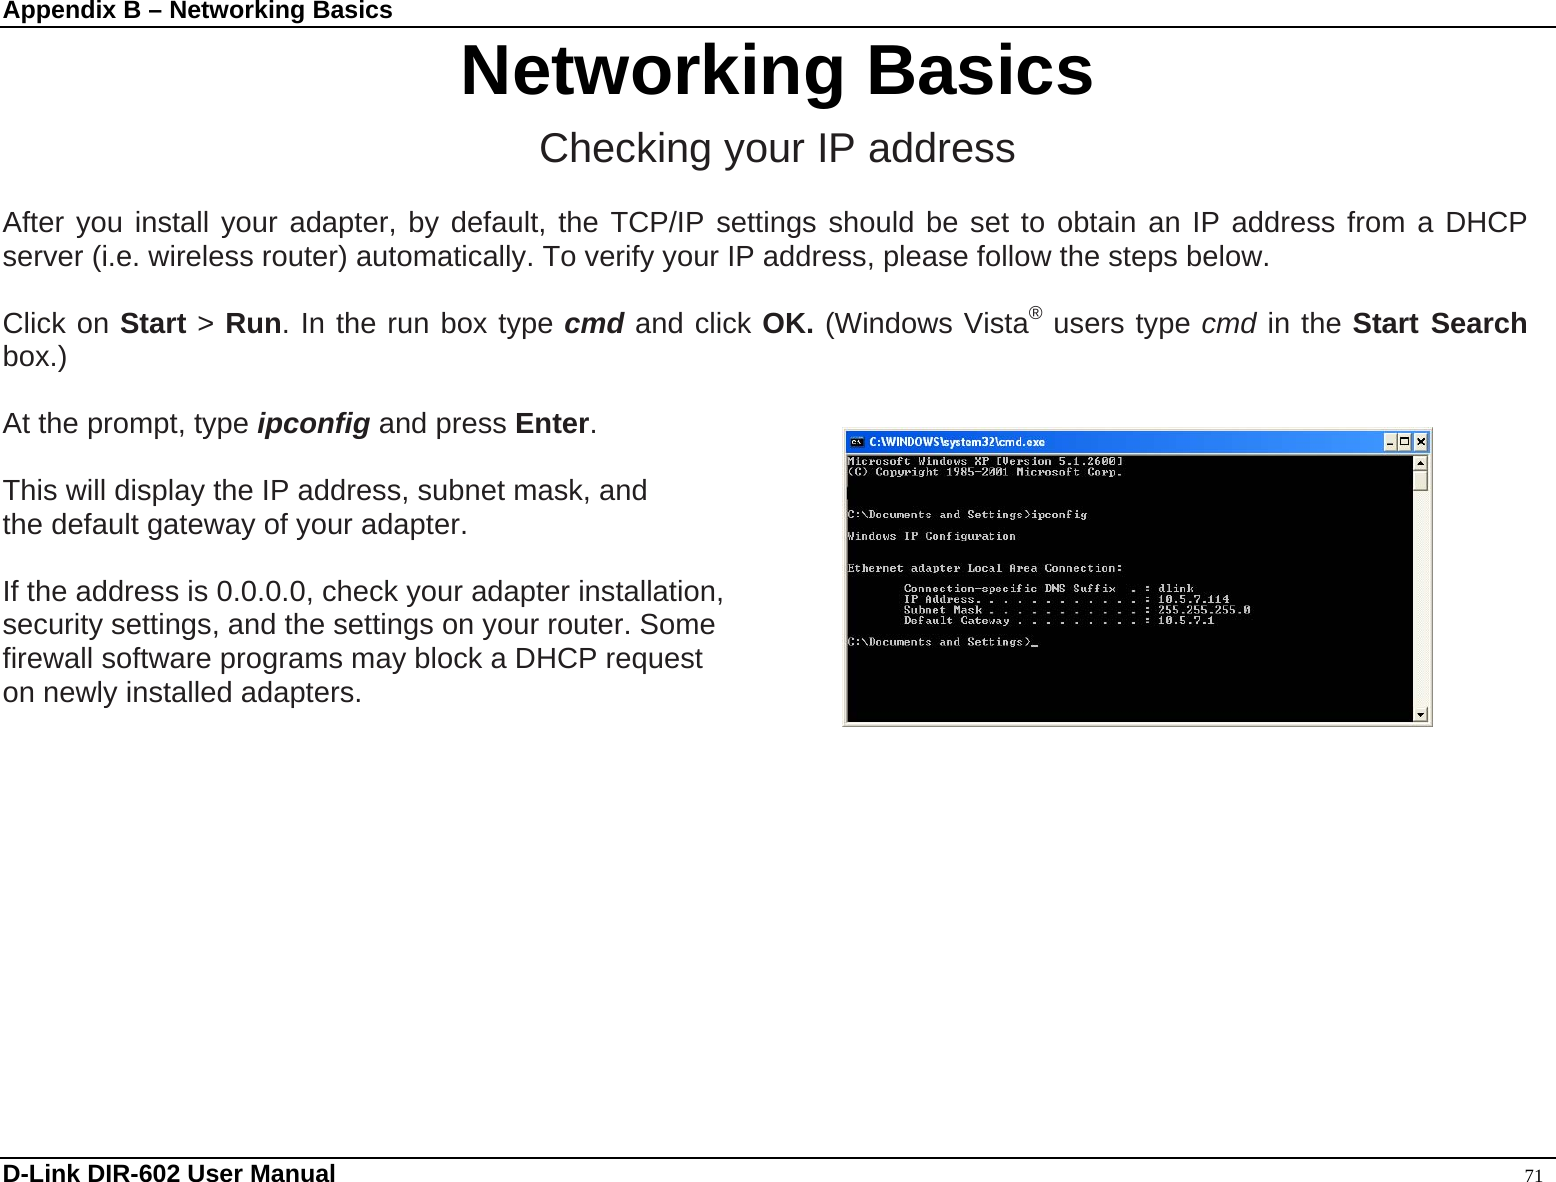 Appendix B – Networking Basics  Networking Basics Checking your IP address  After you install your adapter, by default, the TCP/IP settings should be set to obtain an IP address from a DHCP server (i.e. wireless router) automatically. To verify your IP address, please follow the steps below.  Click on Start &gt; Run. In the run box type cmd and click OK. (Windows Vista® users type cmd in the Start Search box.)  At the prompt, type ipconfig and press Enter.  This will display the IP address, subnet mask, and the default gateway of your adapter.  If the address is 0.0.0.0, check your adapter installation,   security settings, and the settings on your router. Some   firewall software programs may block a DHCP request   on newly installed adapters.           D-Link DIR-602 User Manual                                                                                               71 